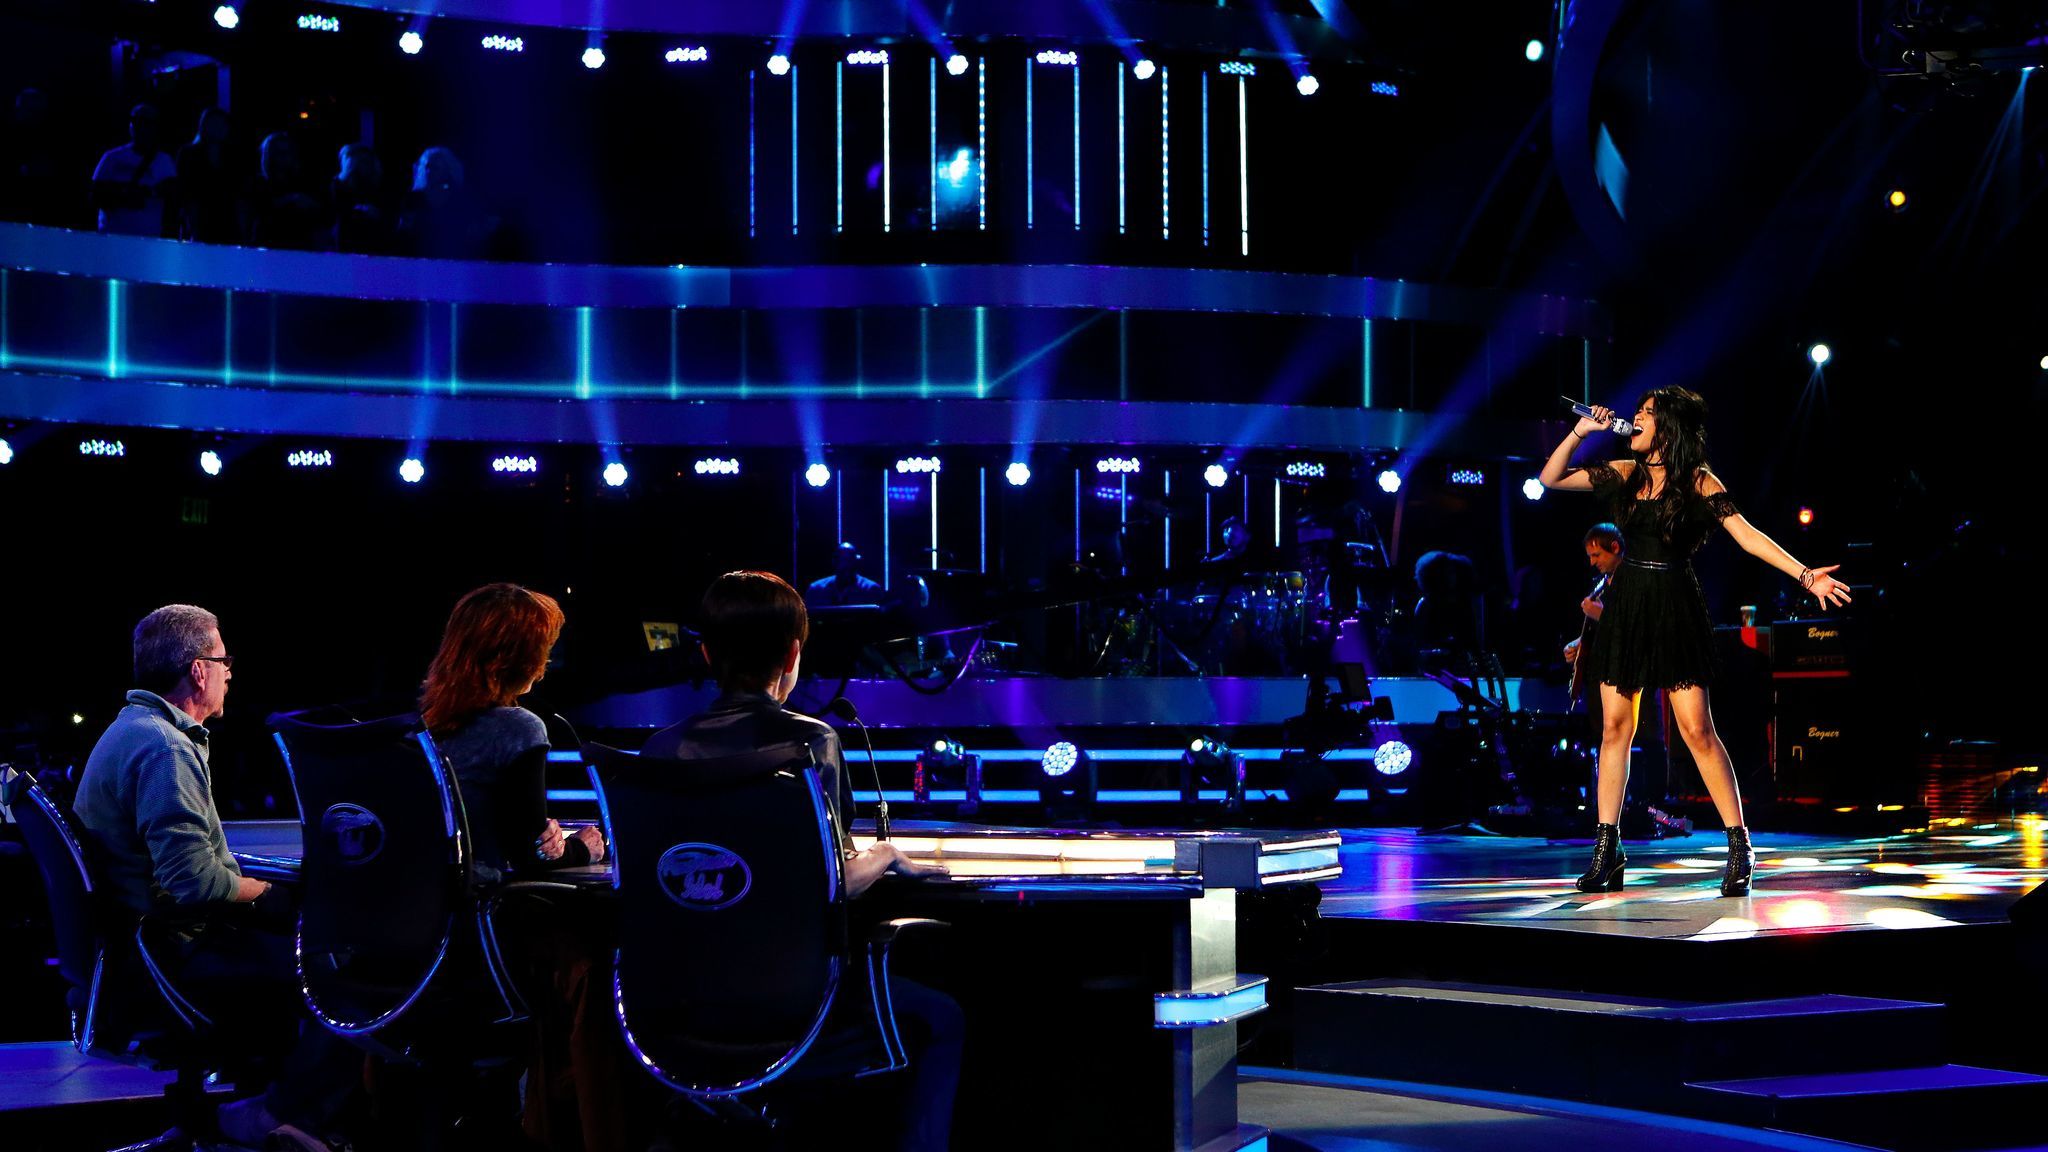 Contestant Sonika Vaid performs during a dress rehearsal for the final season of "American Idol" on Fox. (Mel Melcon / Los Angeles Times)